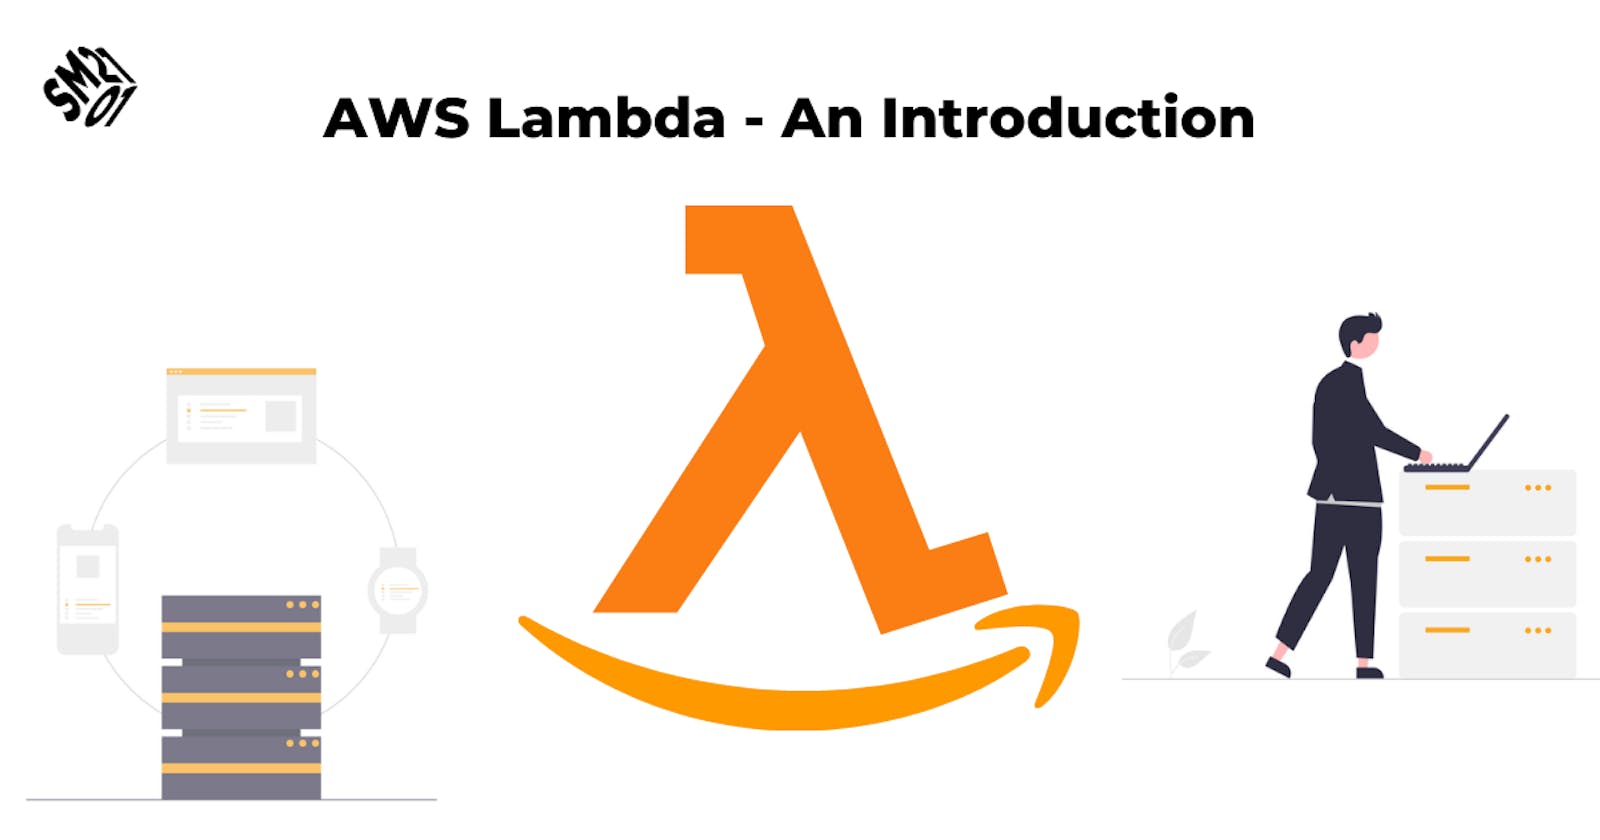 Lambda Functions - What are they? How to use them?